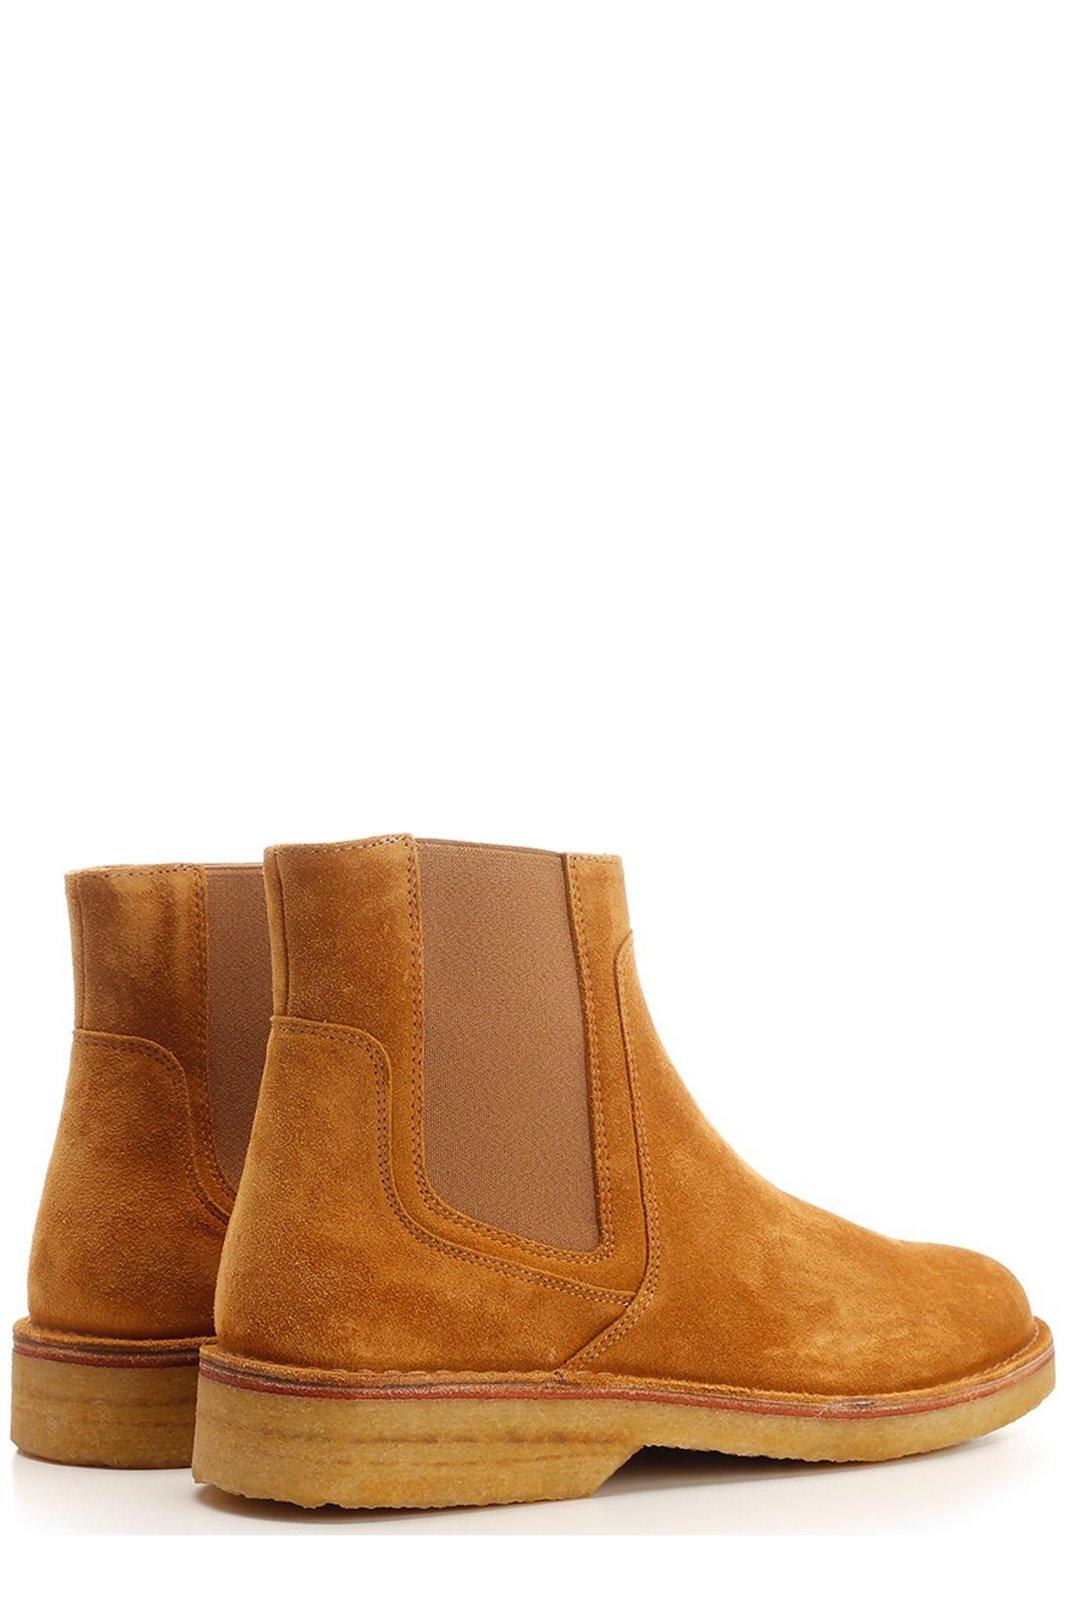 Shop Apc Pointed-toe Ankle Boots In Caf Caramel